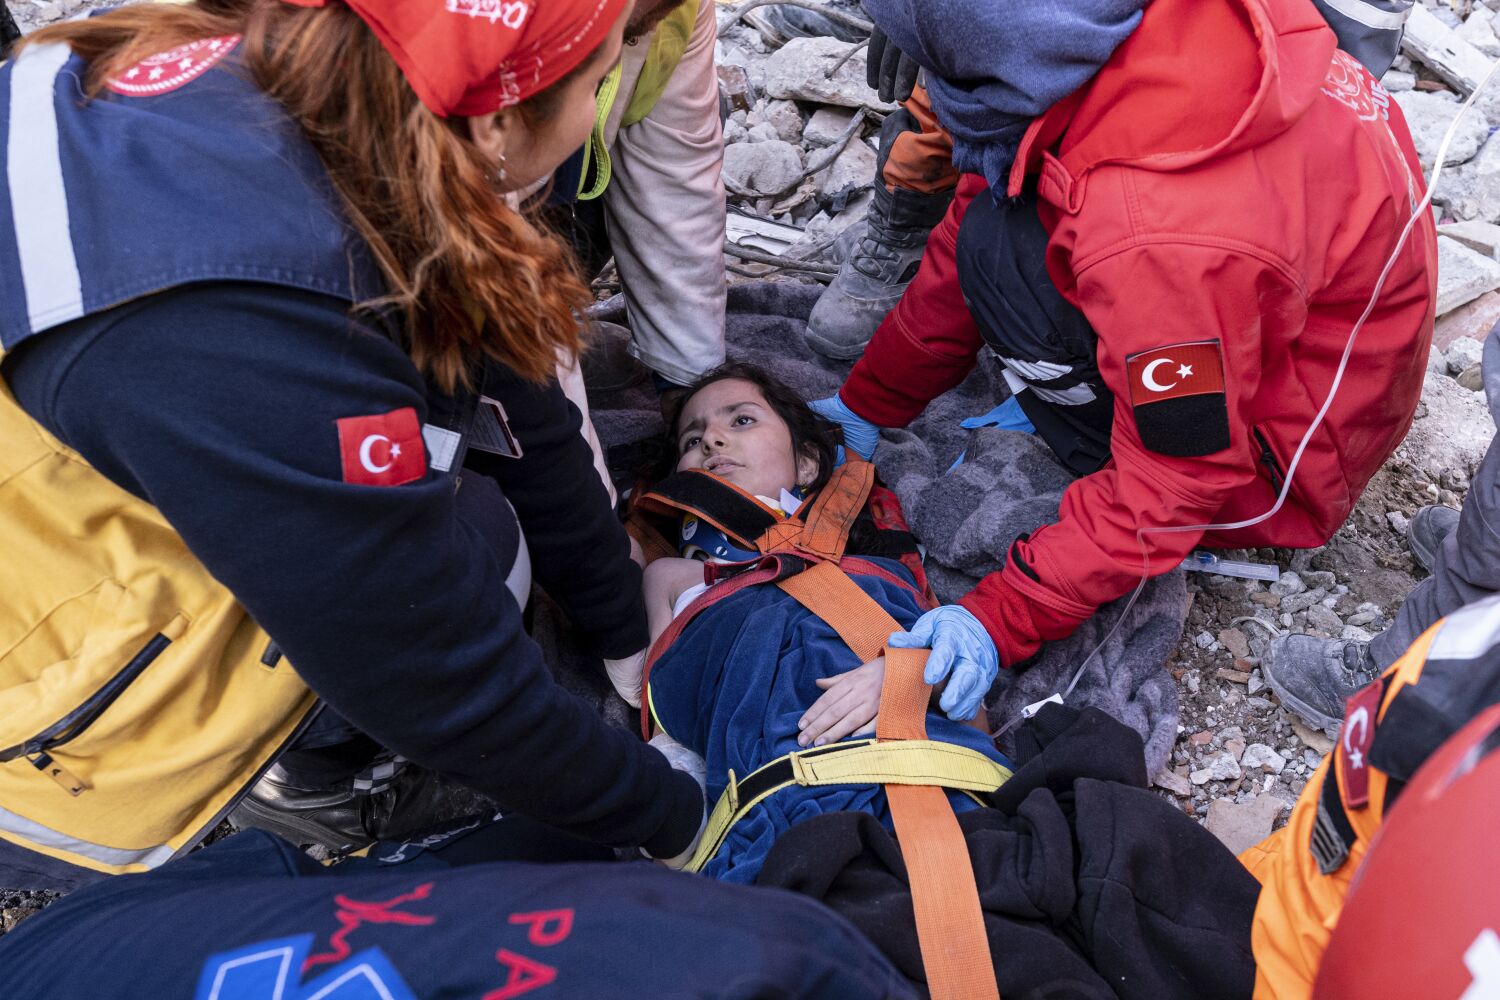 Survivors are still being found in Turkey's earthquake rubble. How long can that go on?